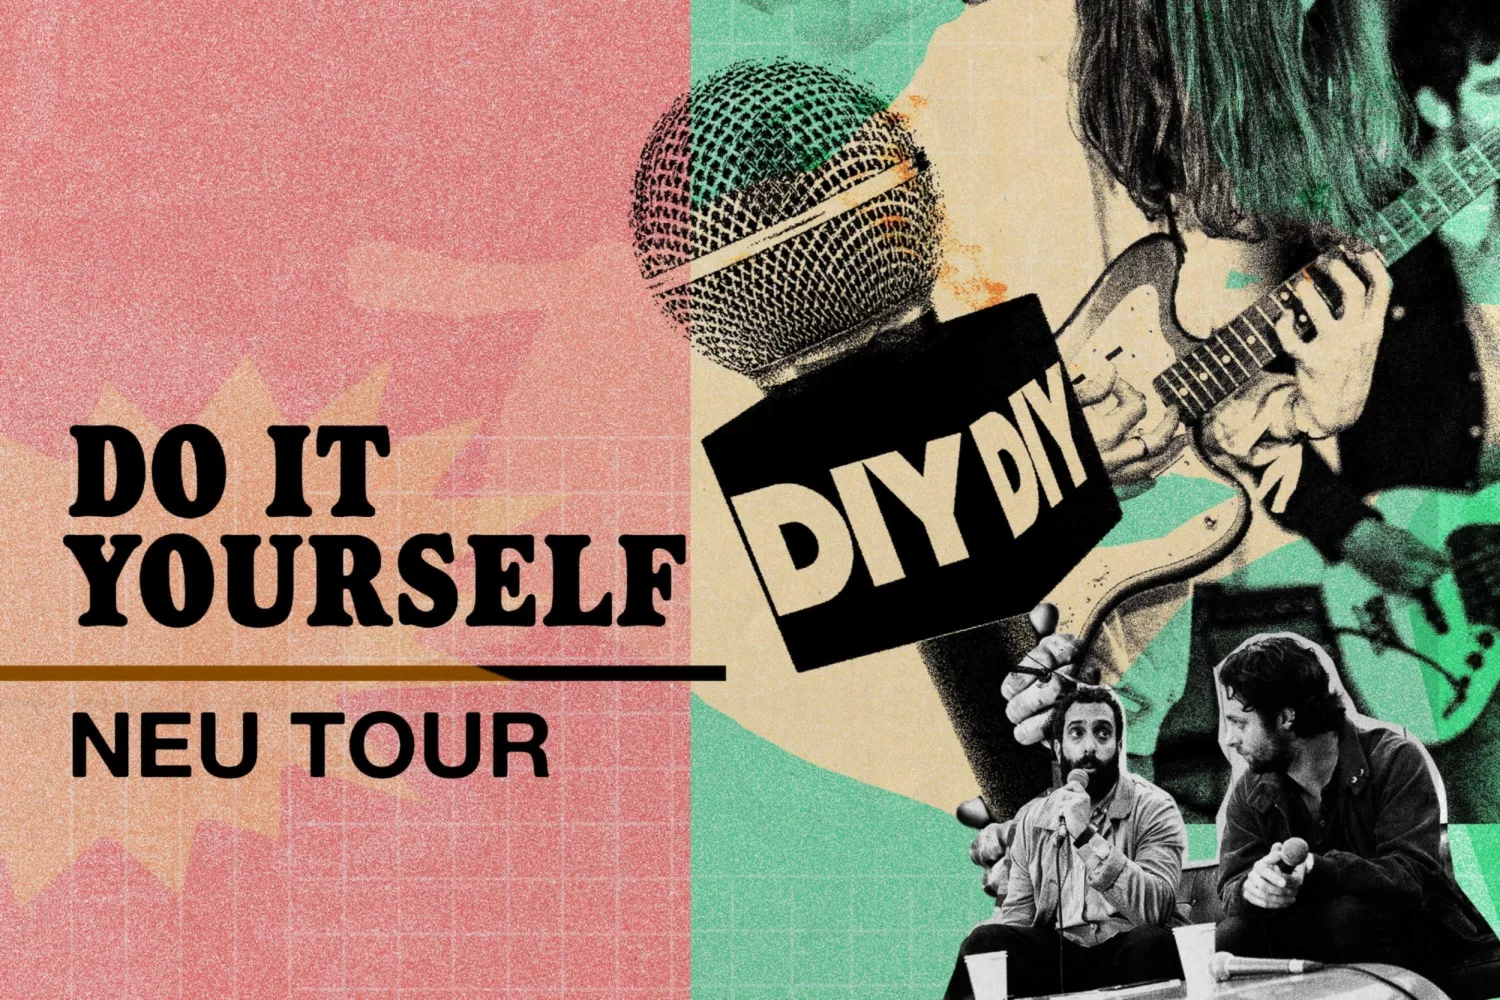 Peace, Pulled Apart by Horses, Dirty Hit, Live at Leeds and lots more to speak at DIY's Do It Yourself Neu Tour!